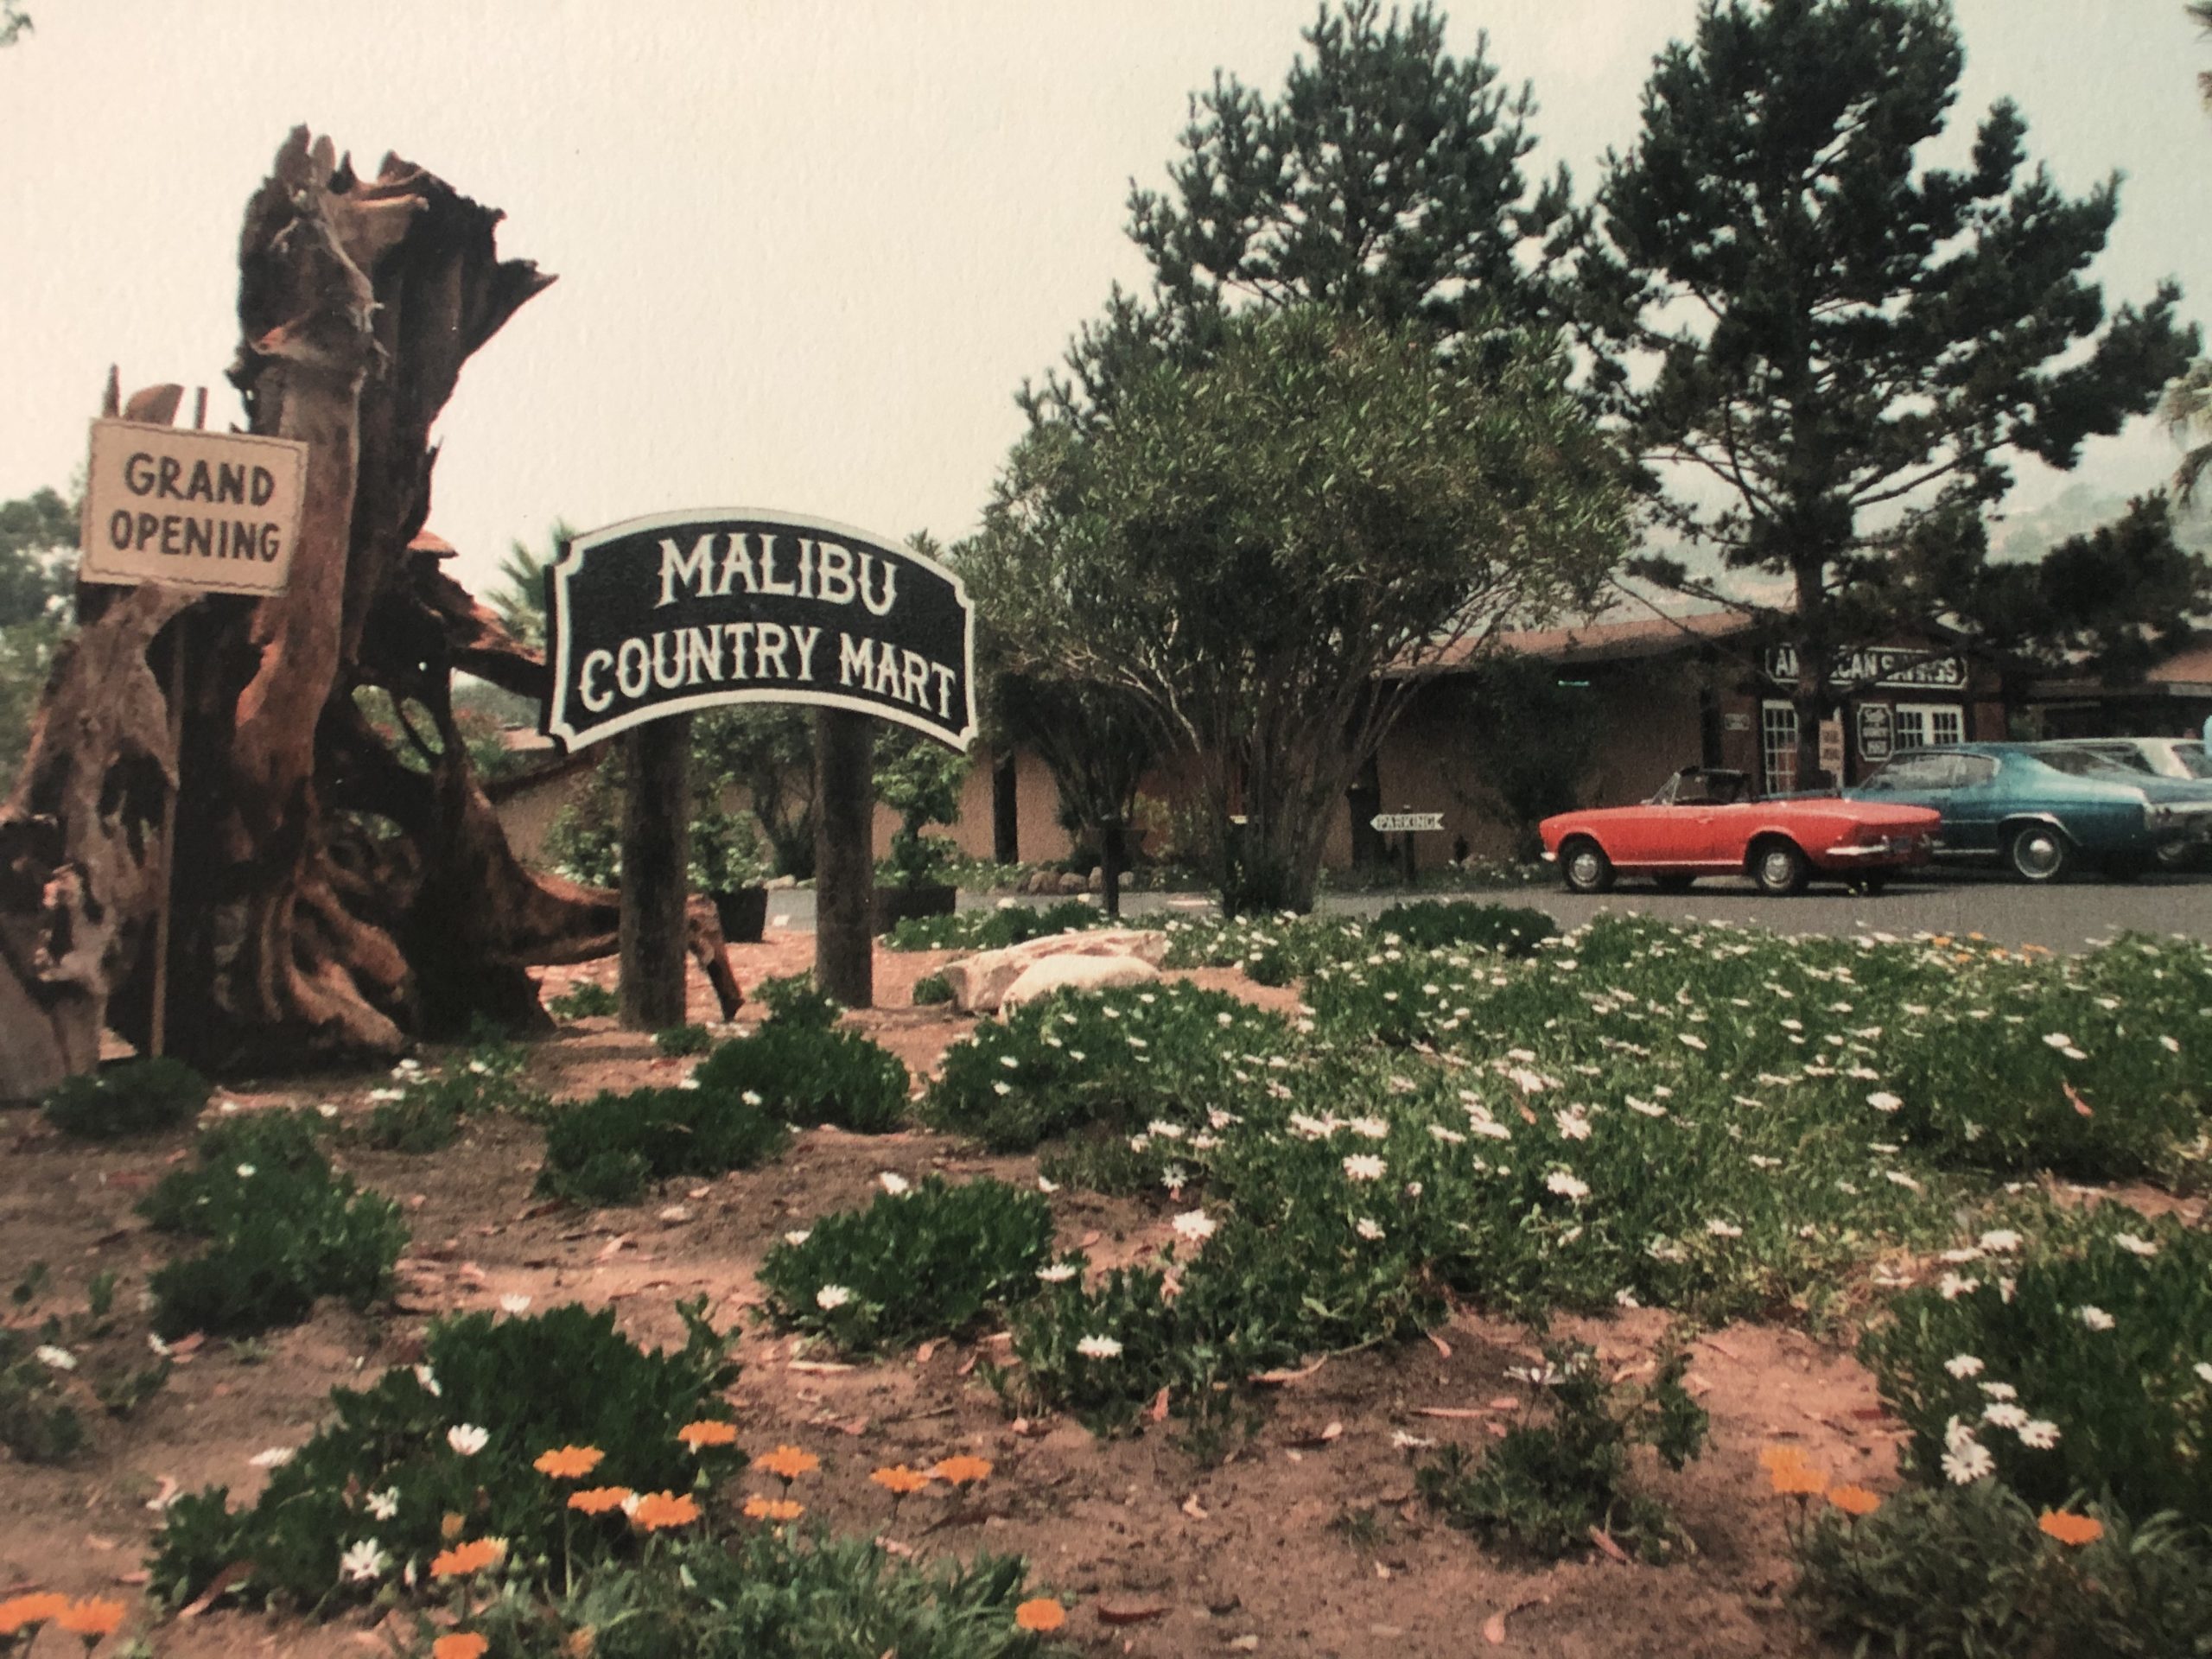 Malibu Country Mart was founded in 1975 and has gone through several impressive transformations.